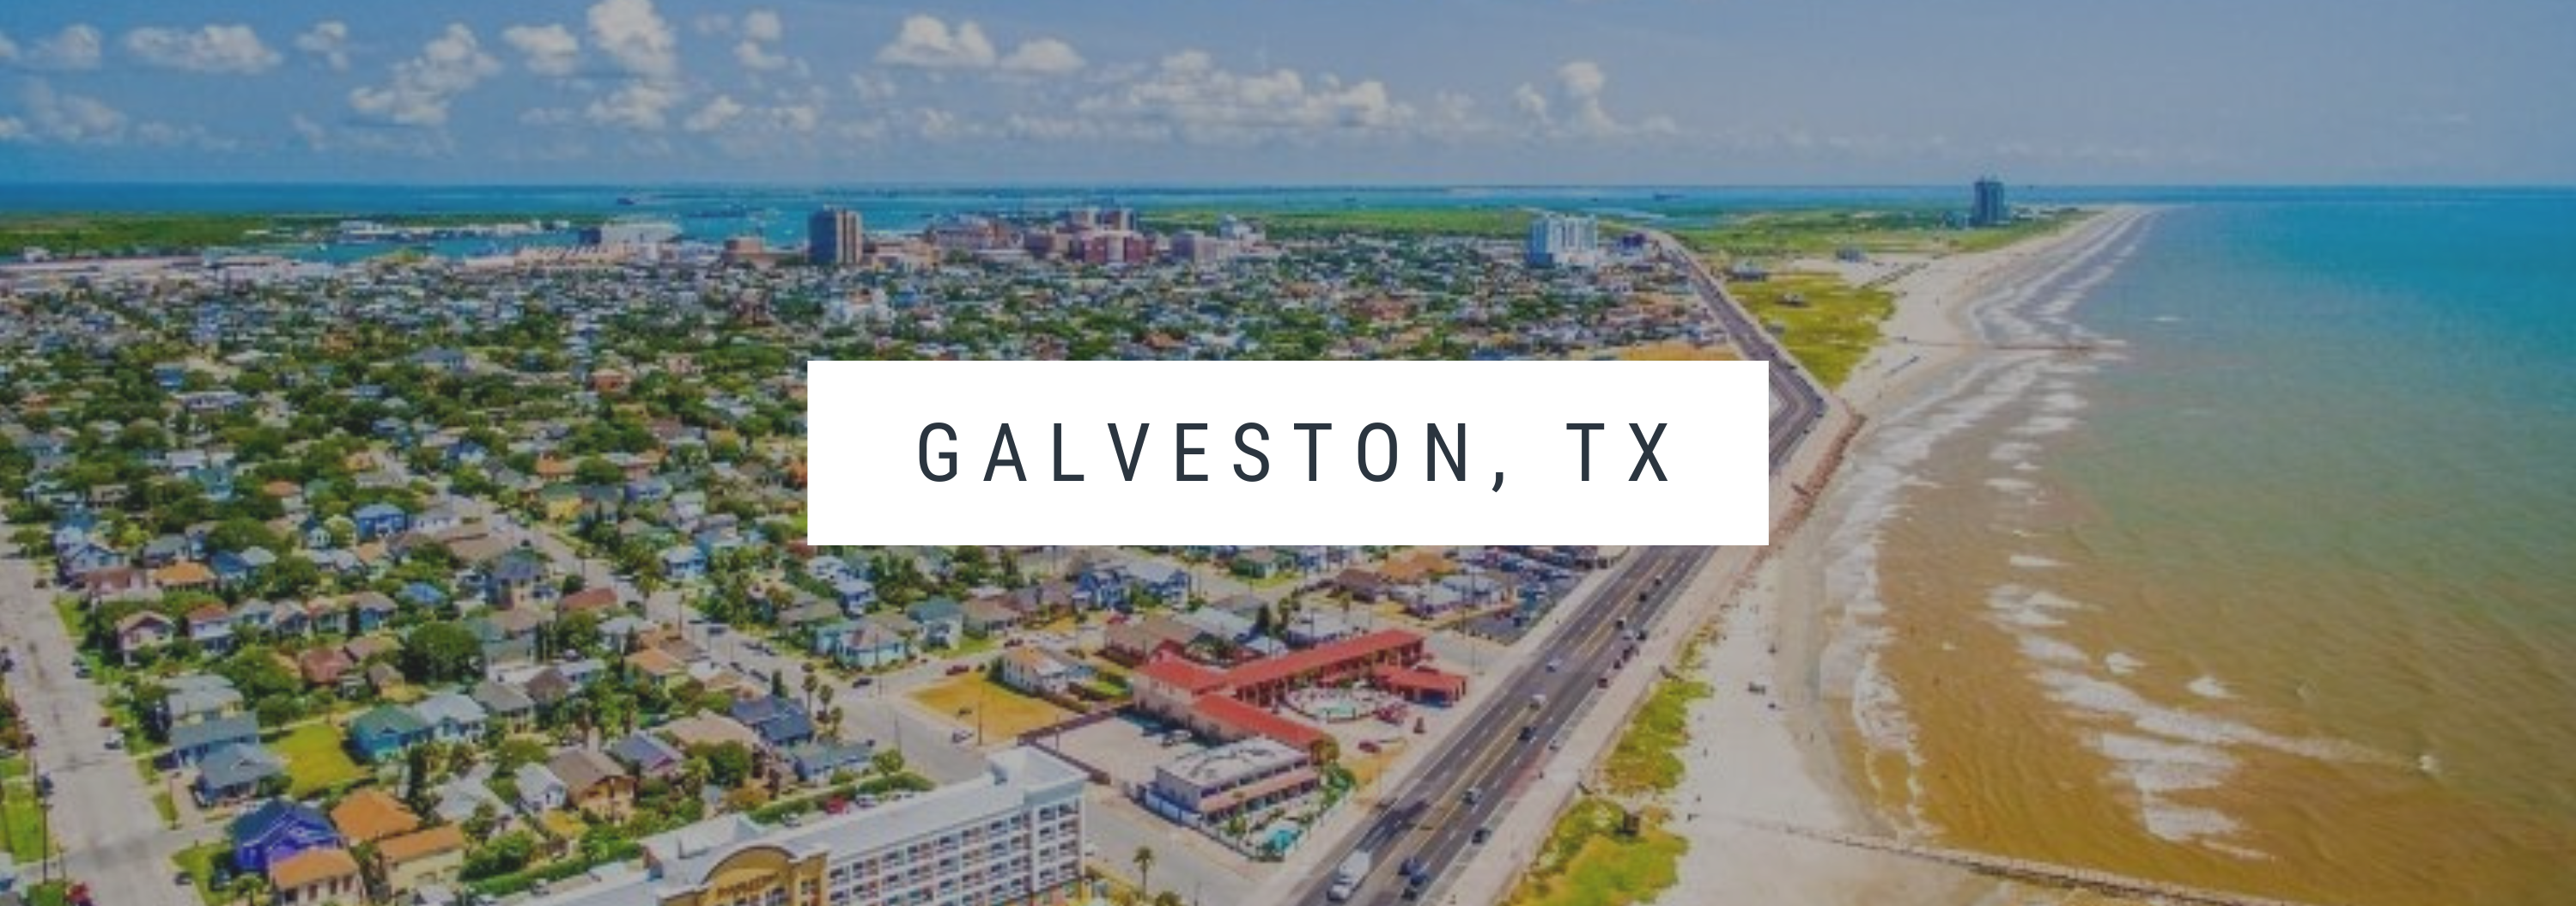 Local-Roofing-Company-in-Galveston-TX